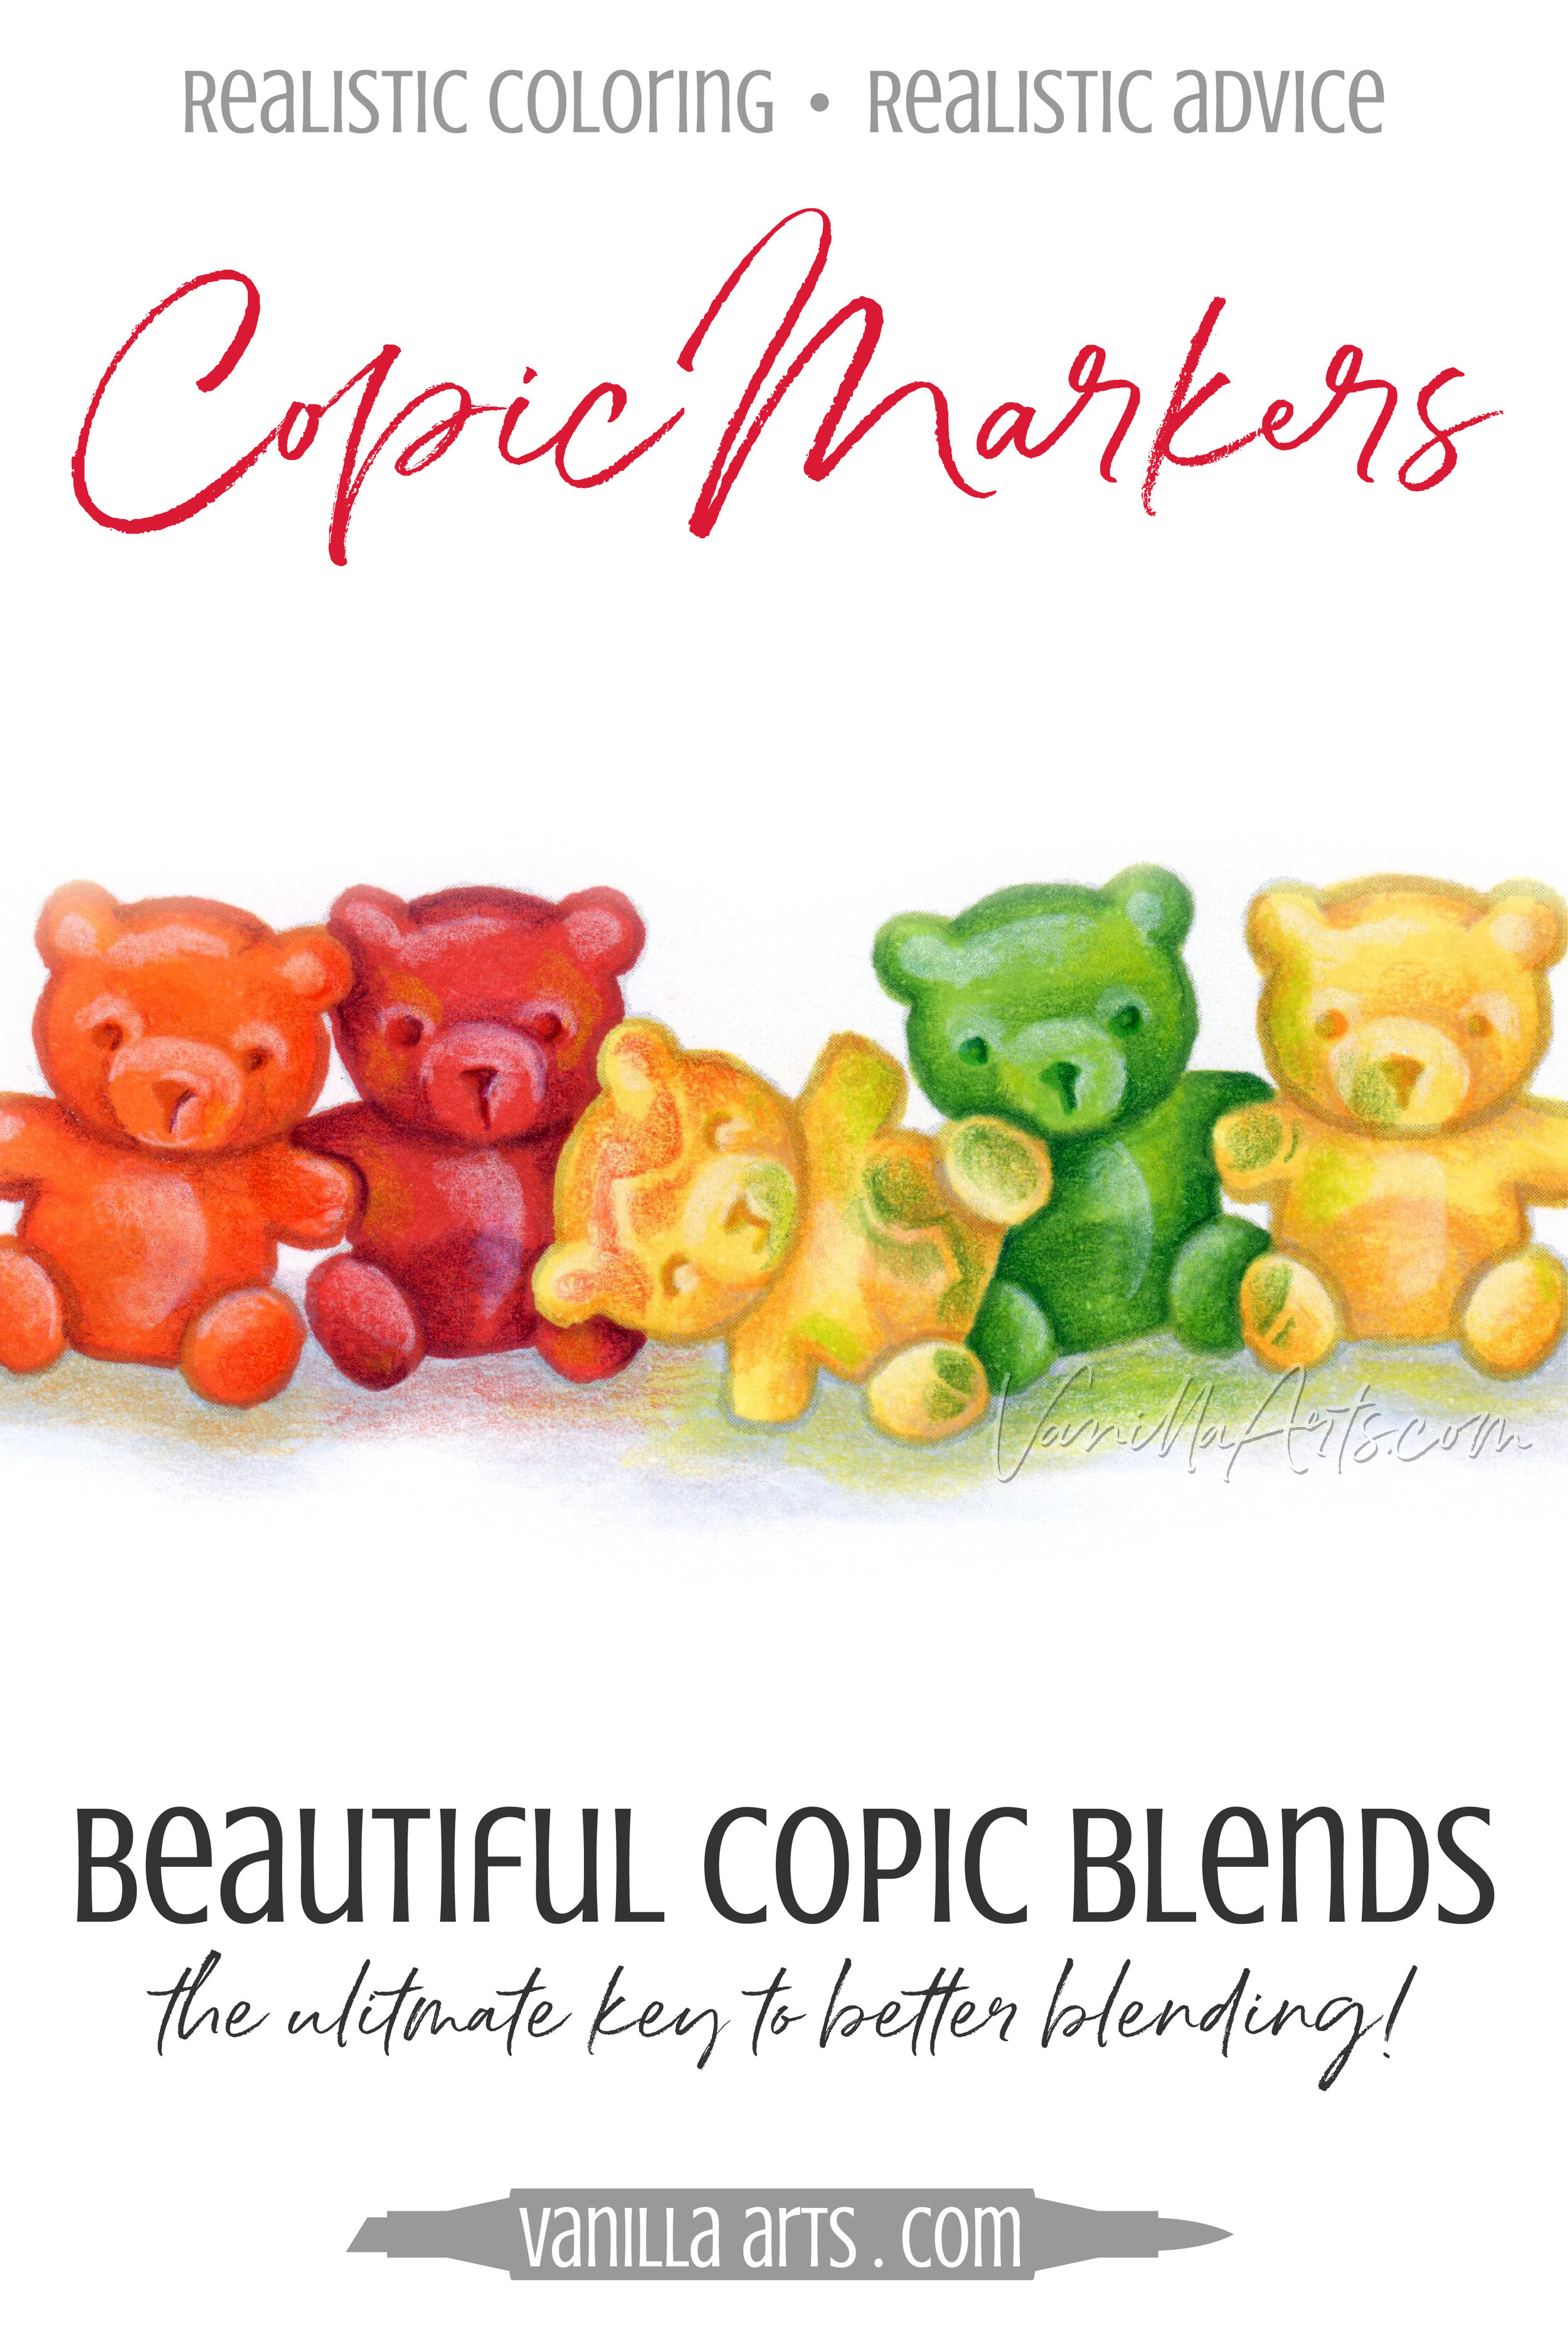 Can you blend copic markers with other brands? - Quora